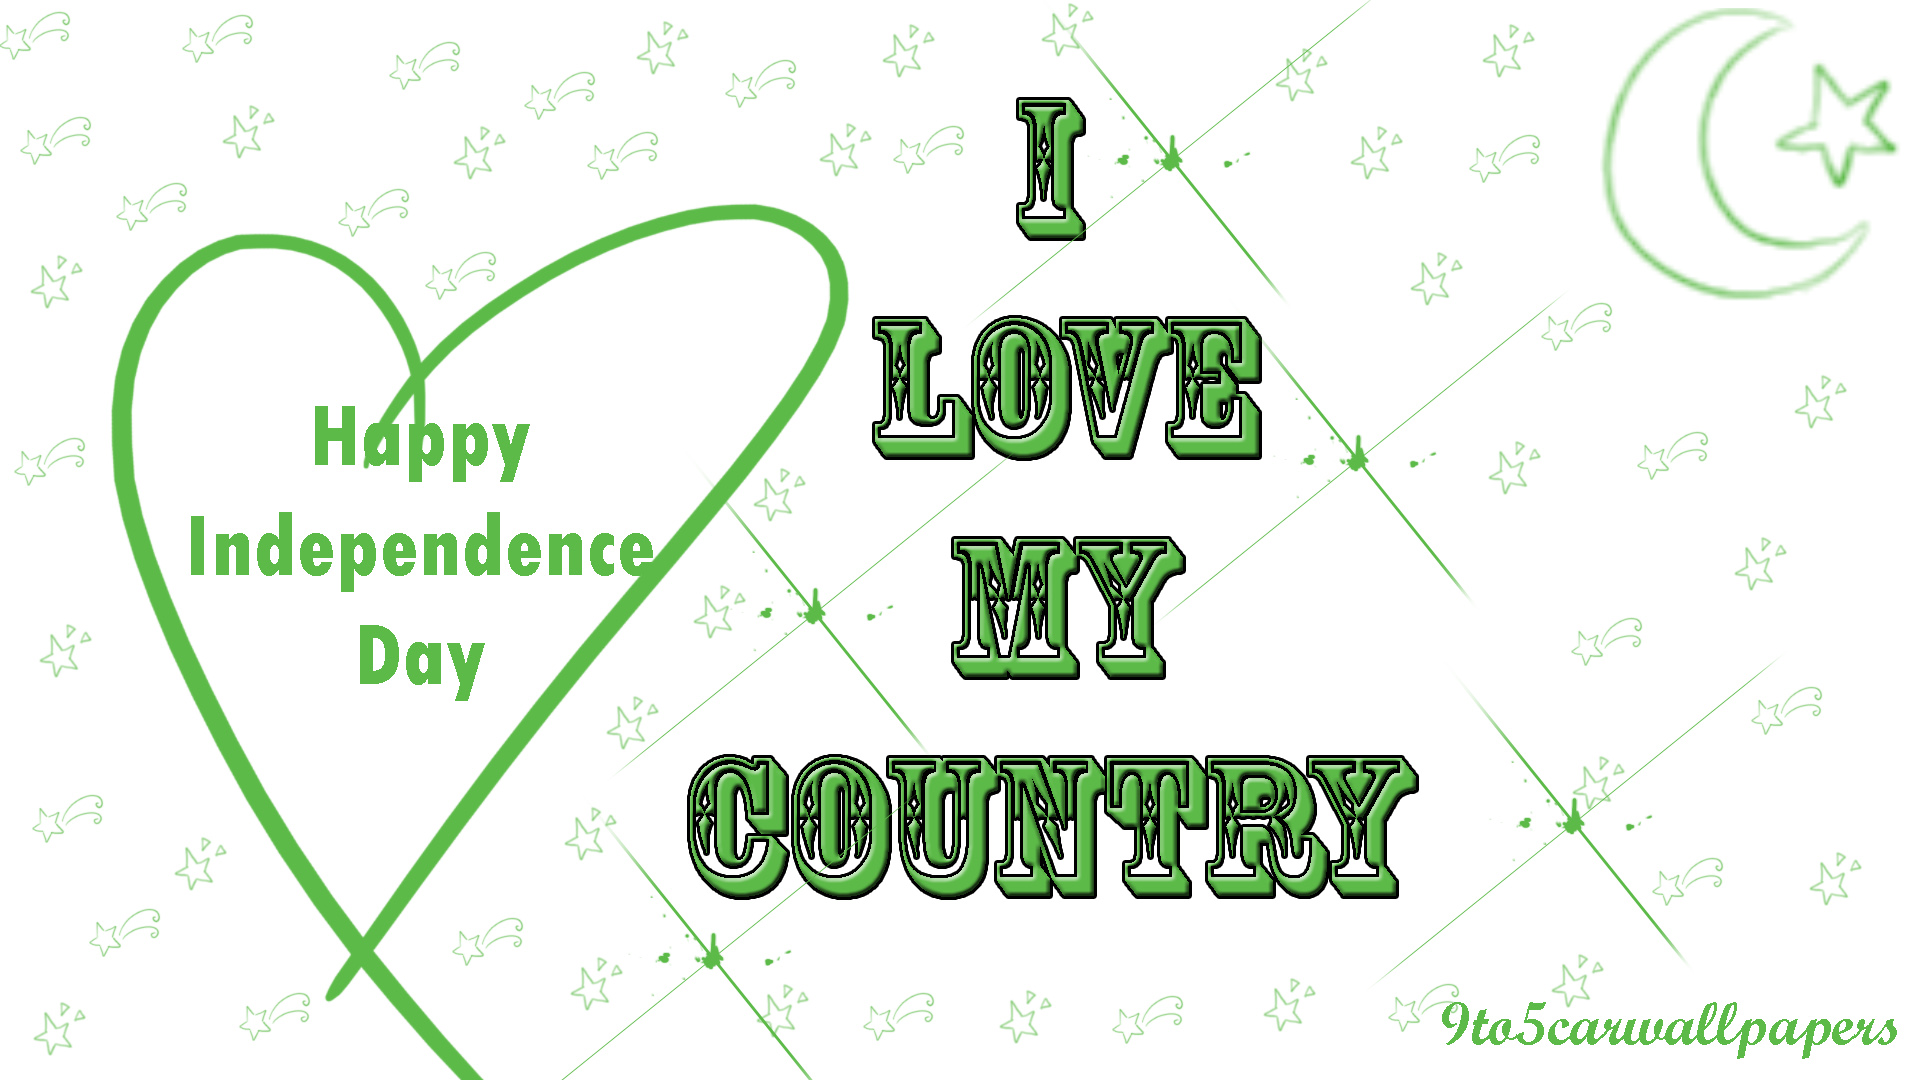 independence-day wallpaper-image-quotes-cards-posters-wishCards